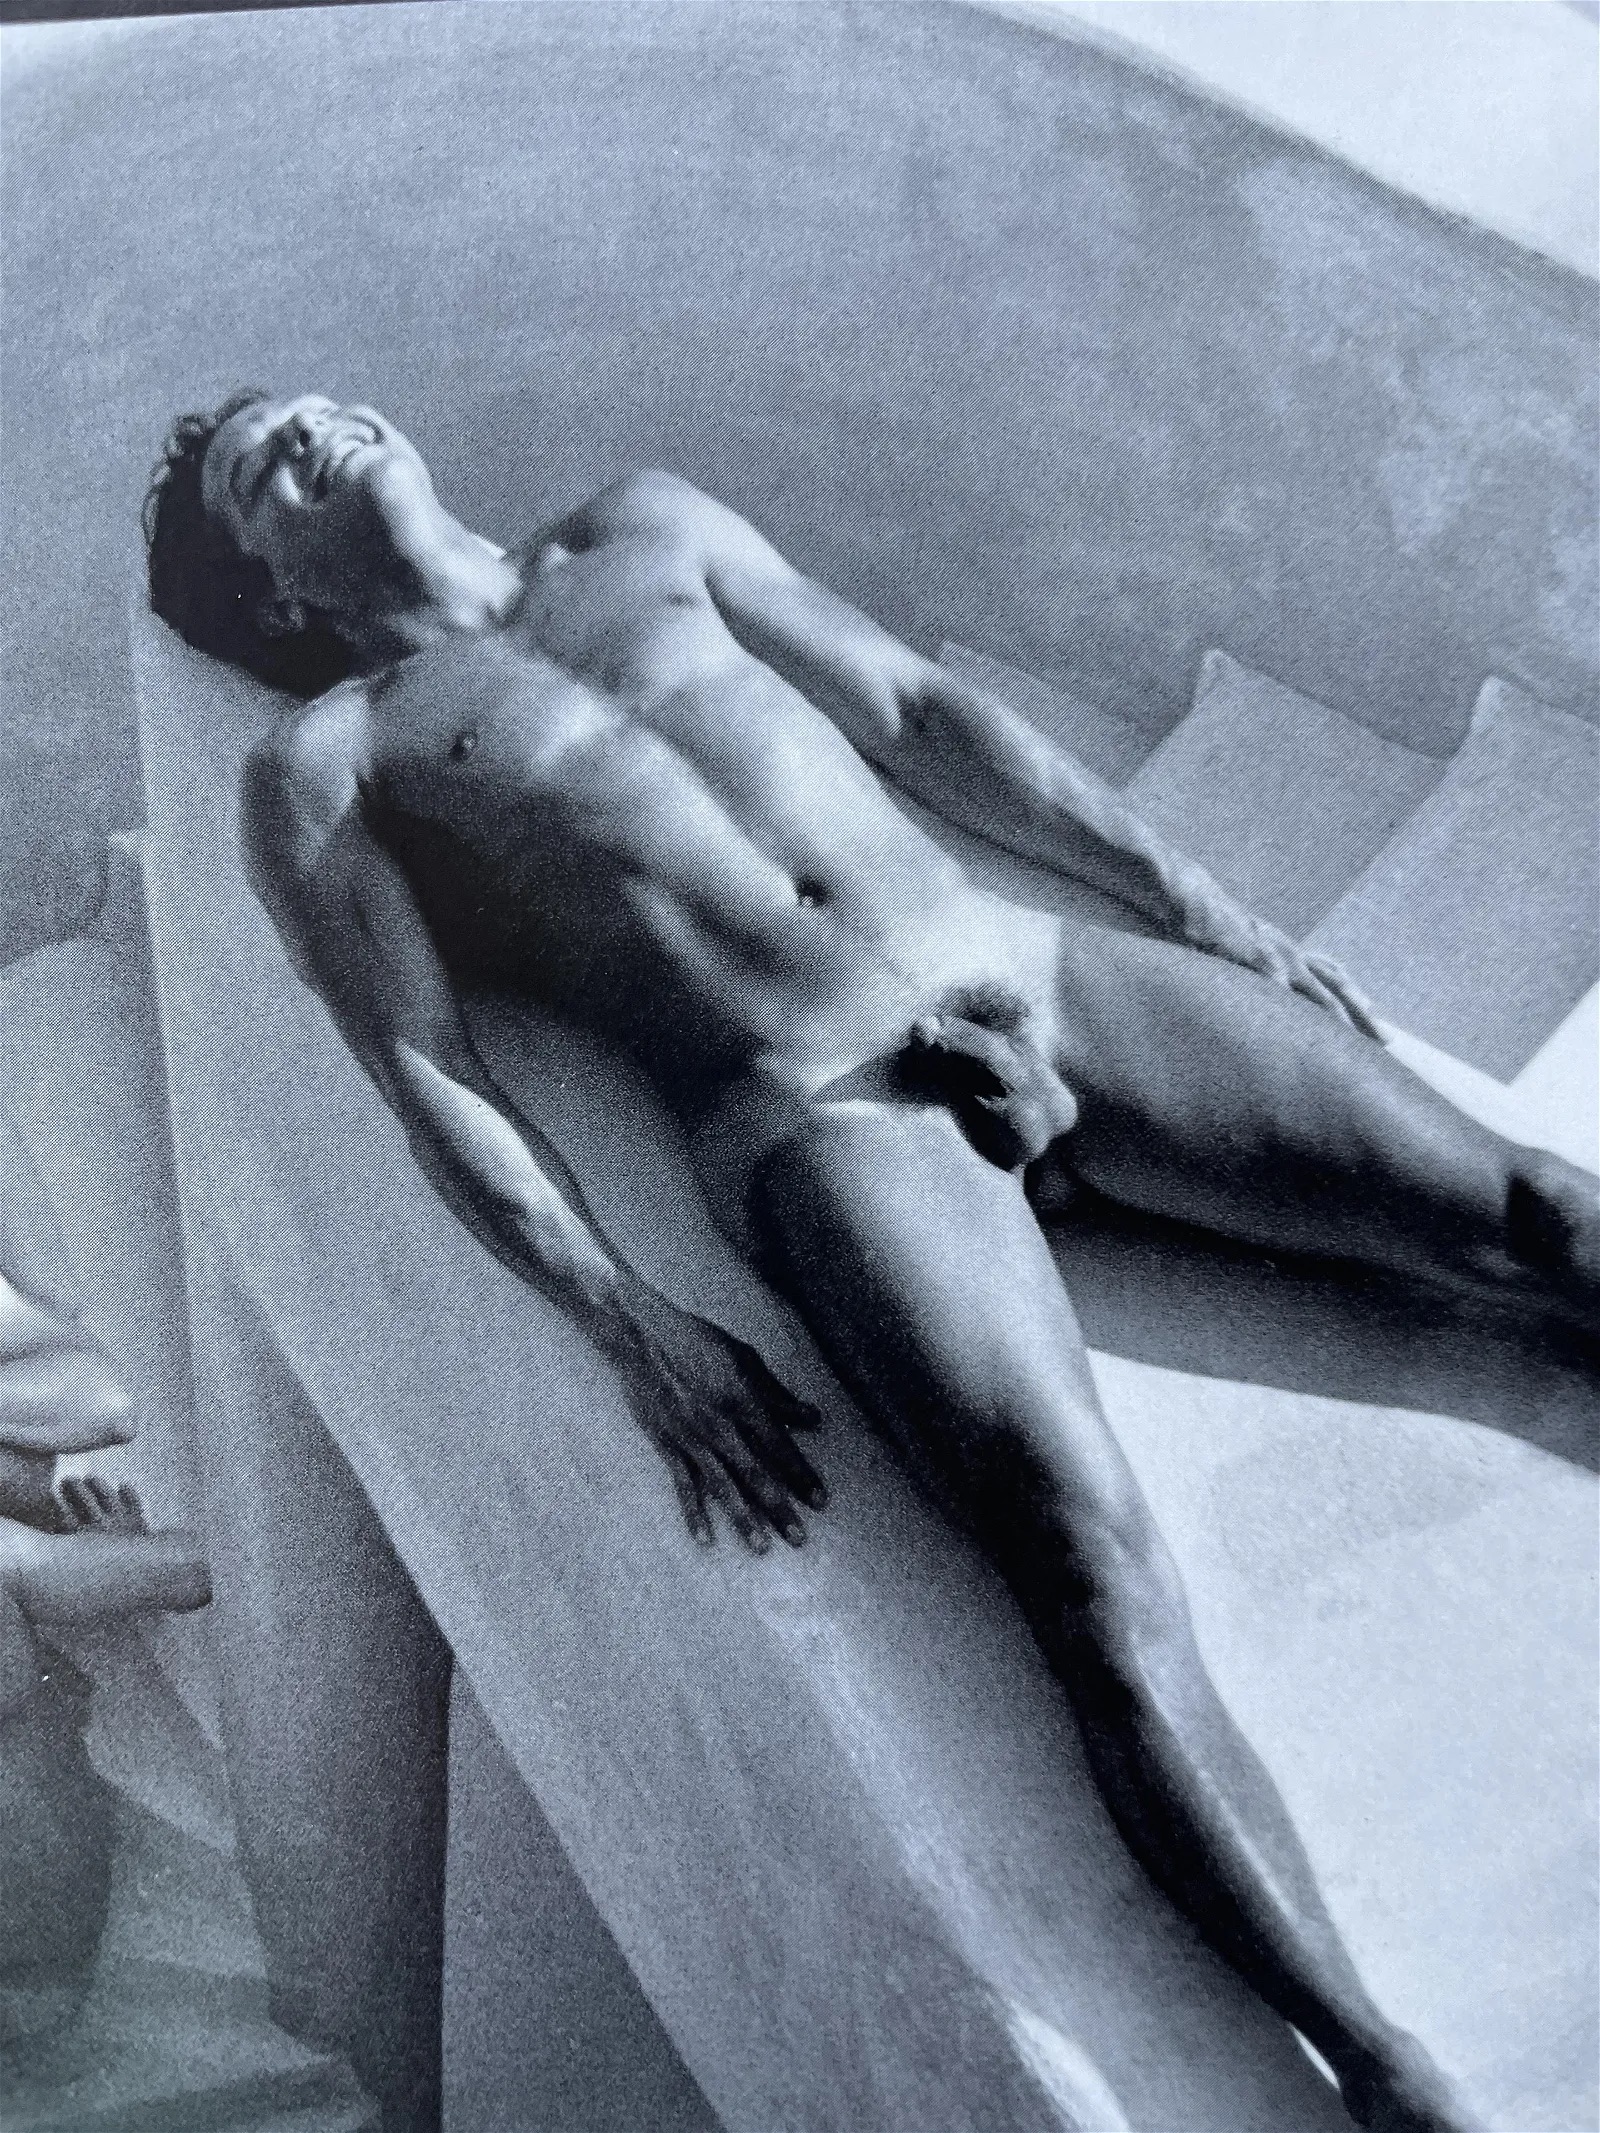 Tom Bianchi "Male Nude, Stairway" Print - Image 3 of 6